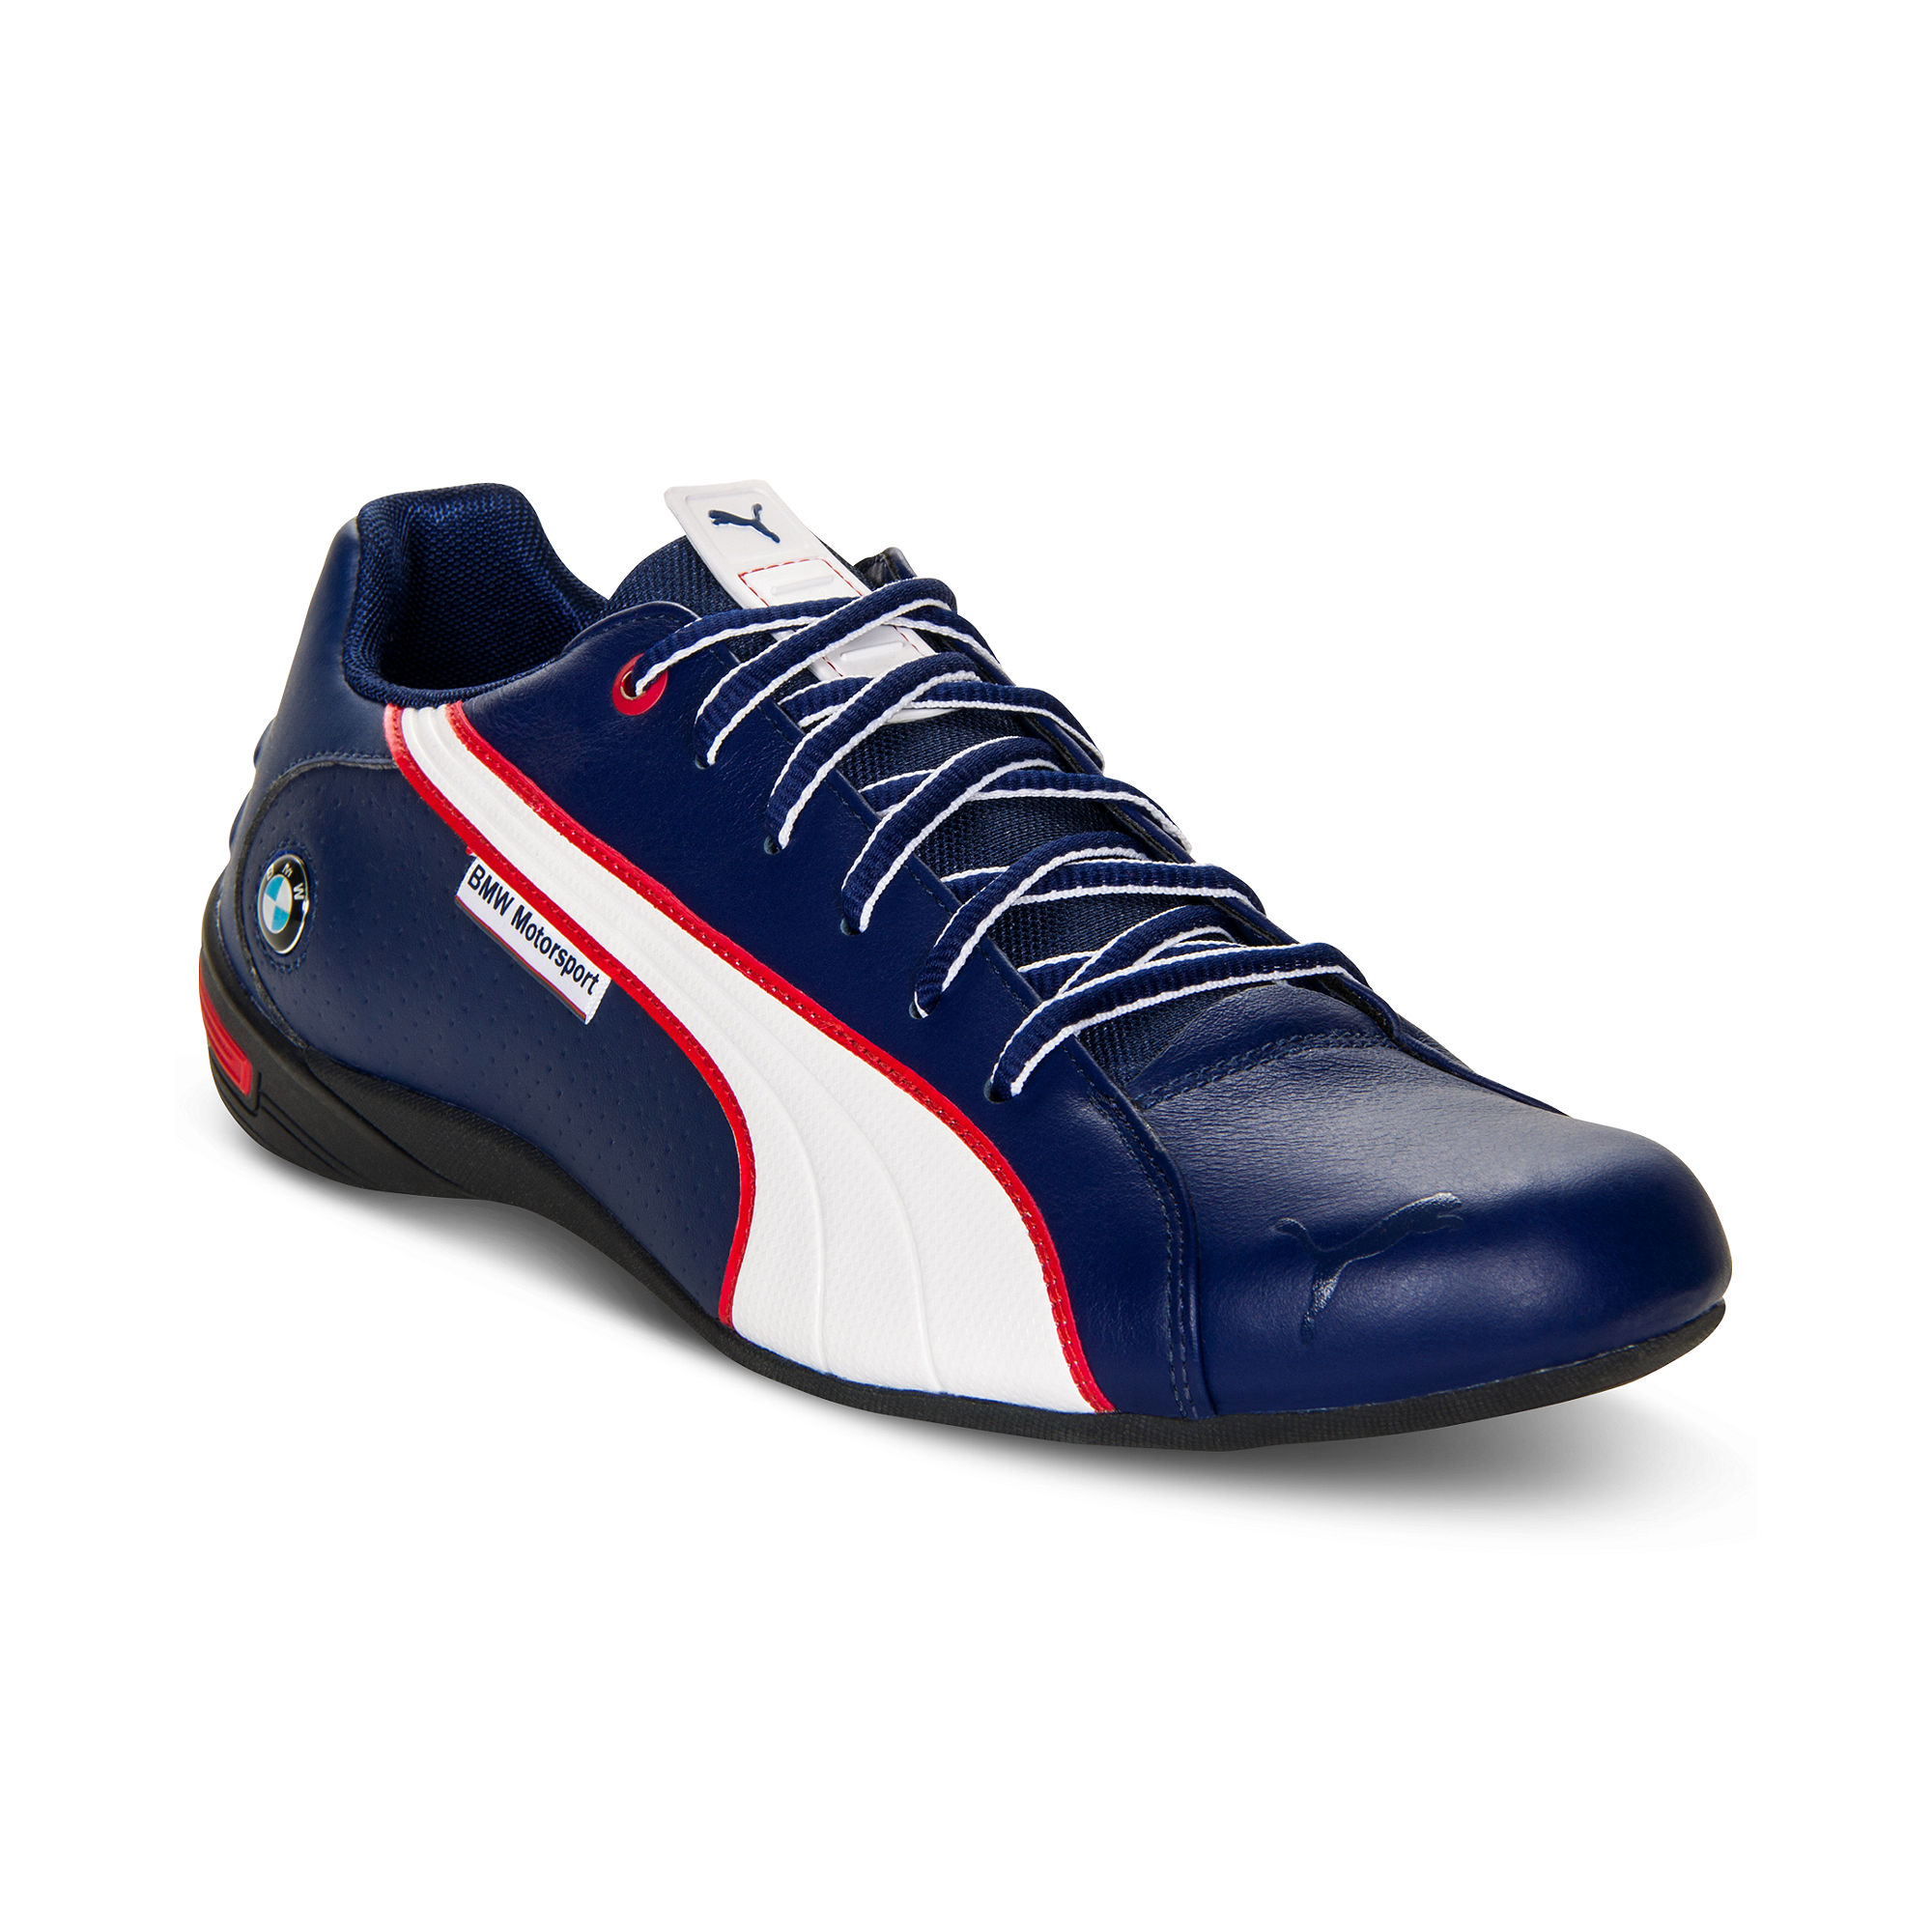 PUMA Nyter Bmw Nm Sneakers in Blue for Men - Lyst